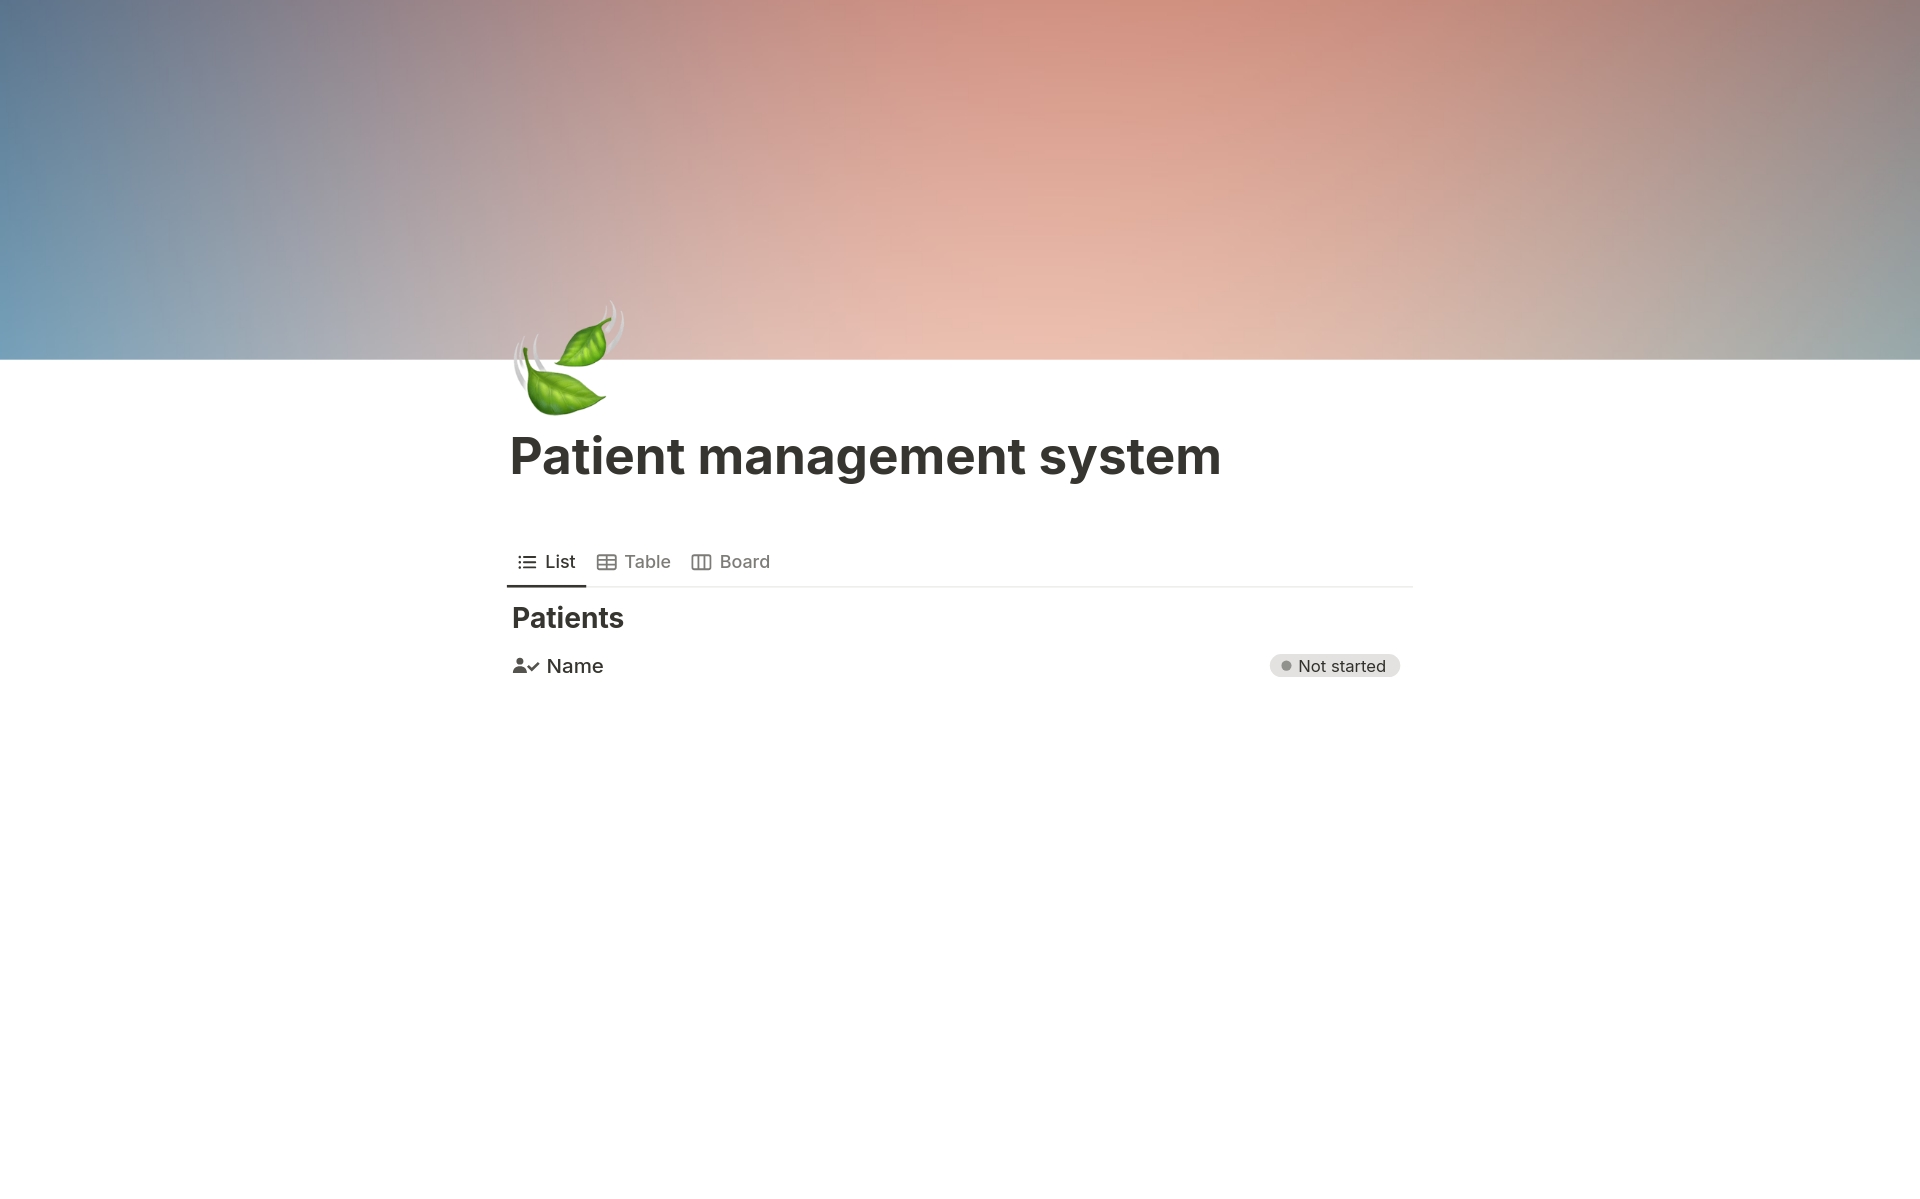 This simple template used to manage patients in your small medical business. 
features
- manage patients
- add notes to patients
- record patient attended time
- view all records in one place
